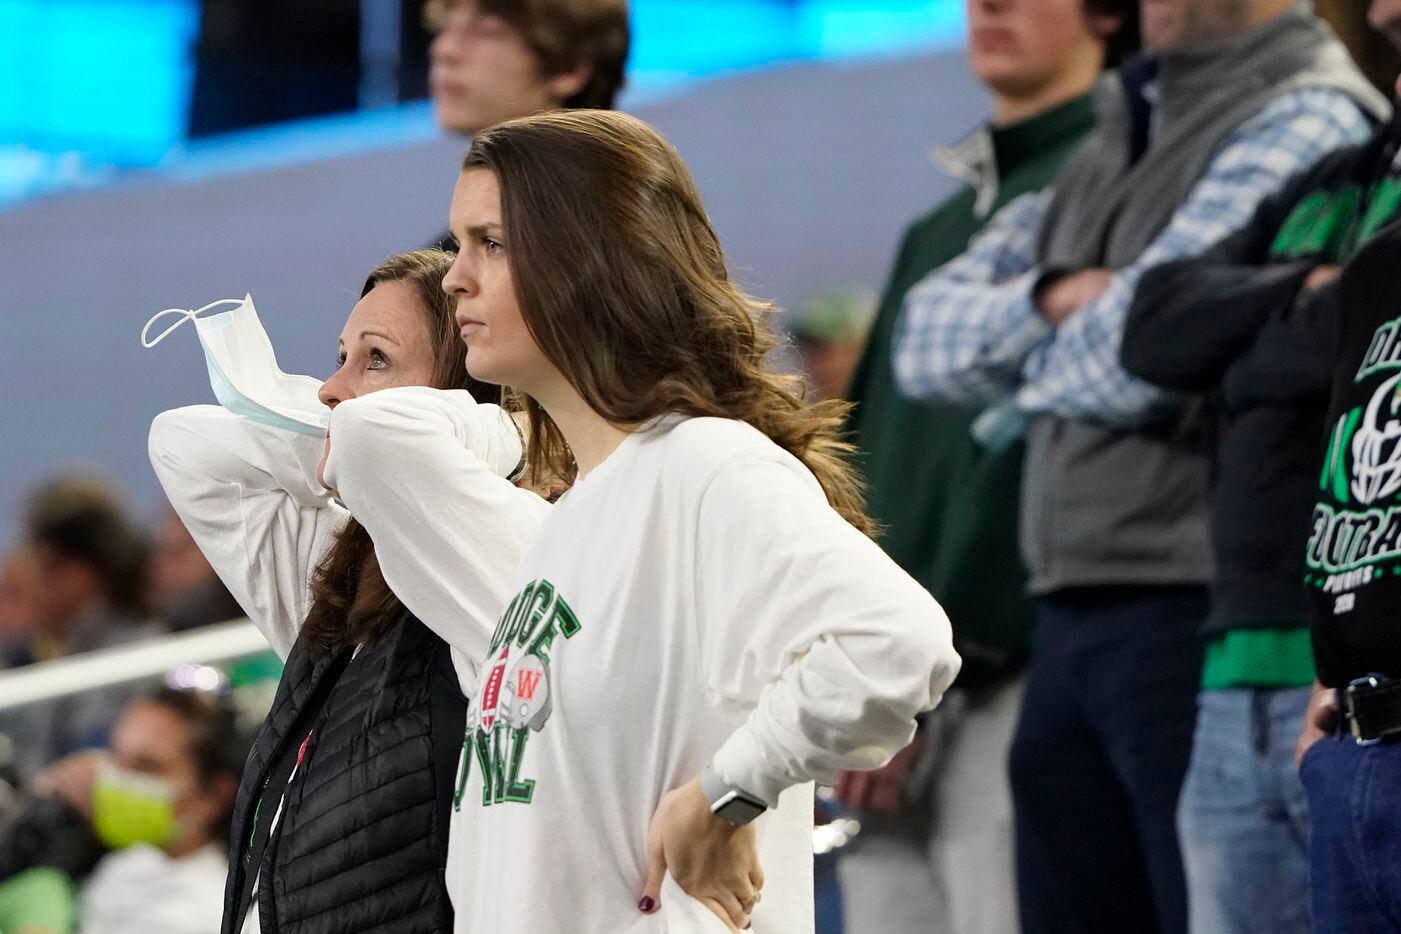 Alexis Dodge, wife of Southlake Carroll head coach Riley Dodge, watches during the third quarter of the Class 6A Division I state football championship game against Austin Westlake at AT&T Stadium on Saturday, Jan. 16, 2021, in Arlington, Texas. (Smiley N. Pool/The Dallas Morning News)